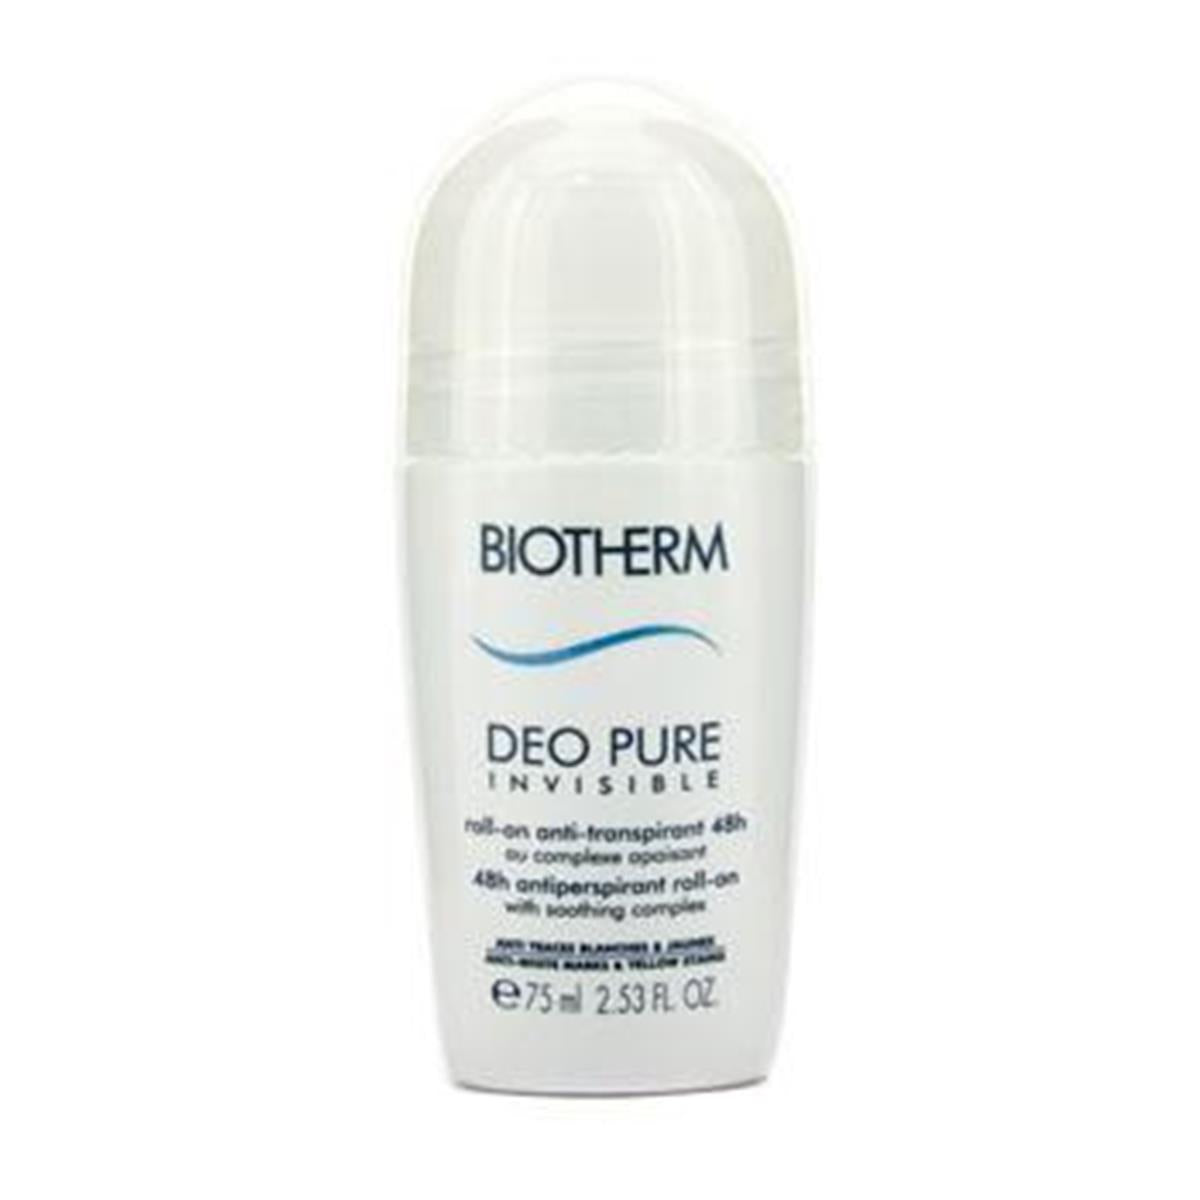 Biotherm 15349476703 Deo Pure Invisible 48 Hours Antiperspirant Roll-On - 75ml-2.53oz One Size